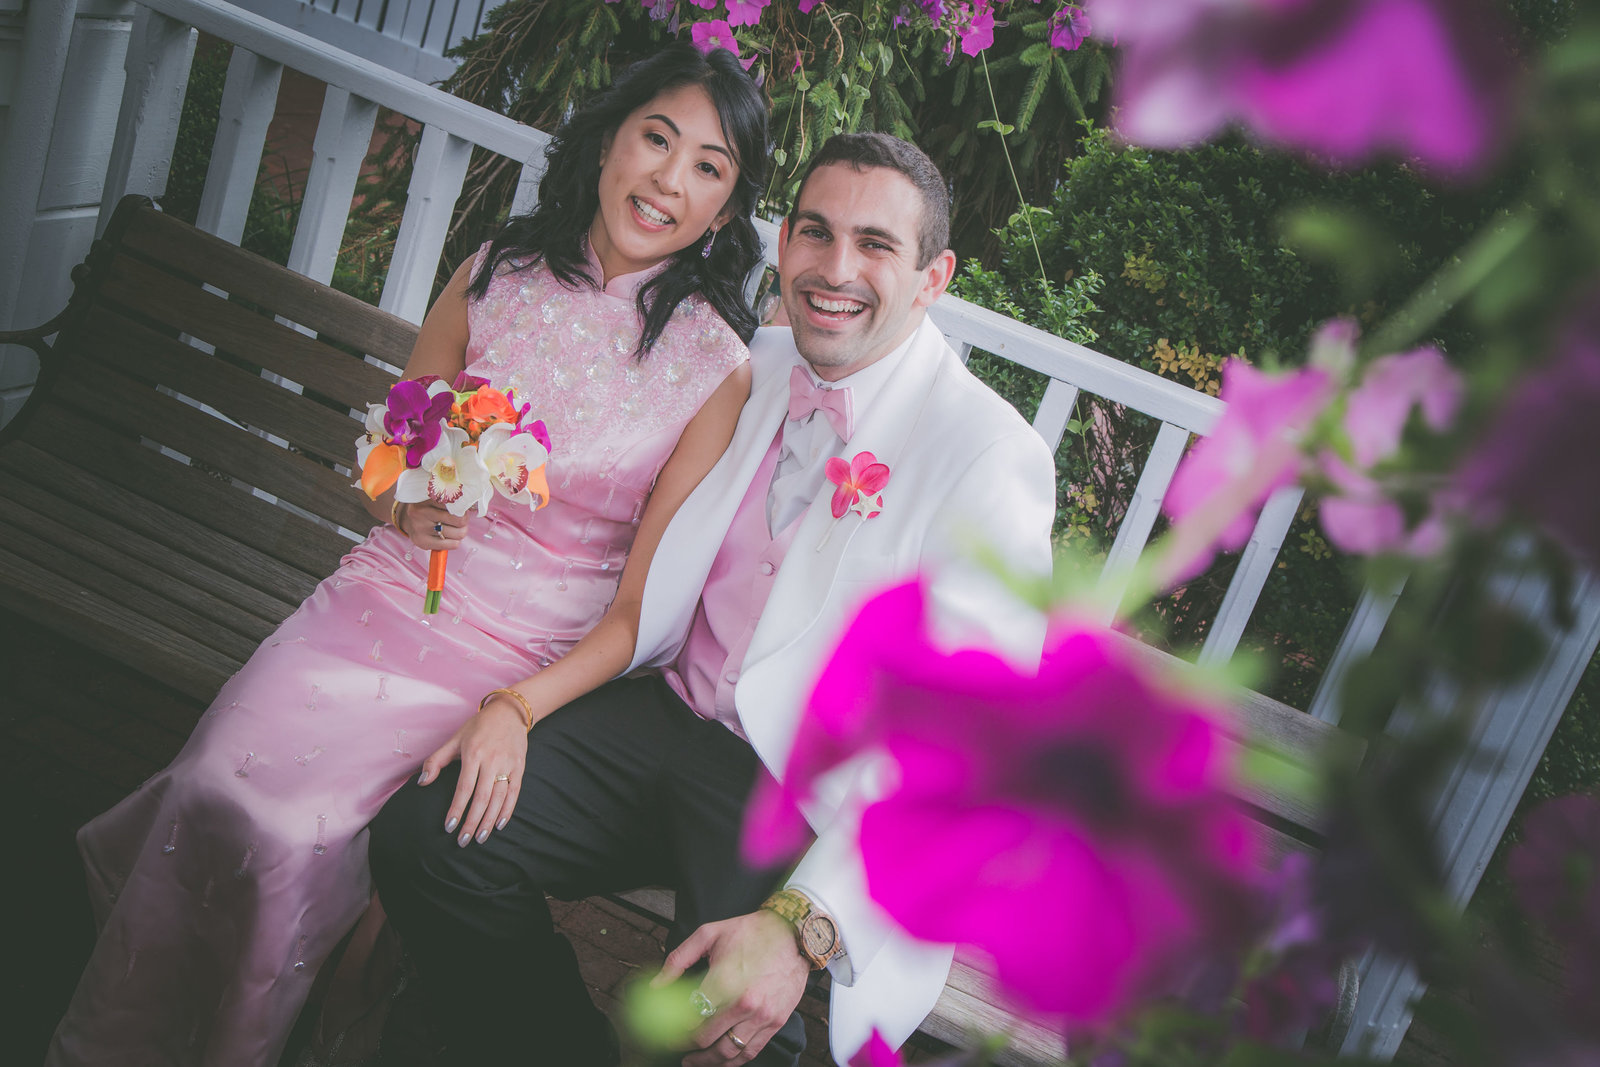 Couple looks at photographer and is framed in pink flowers.